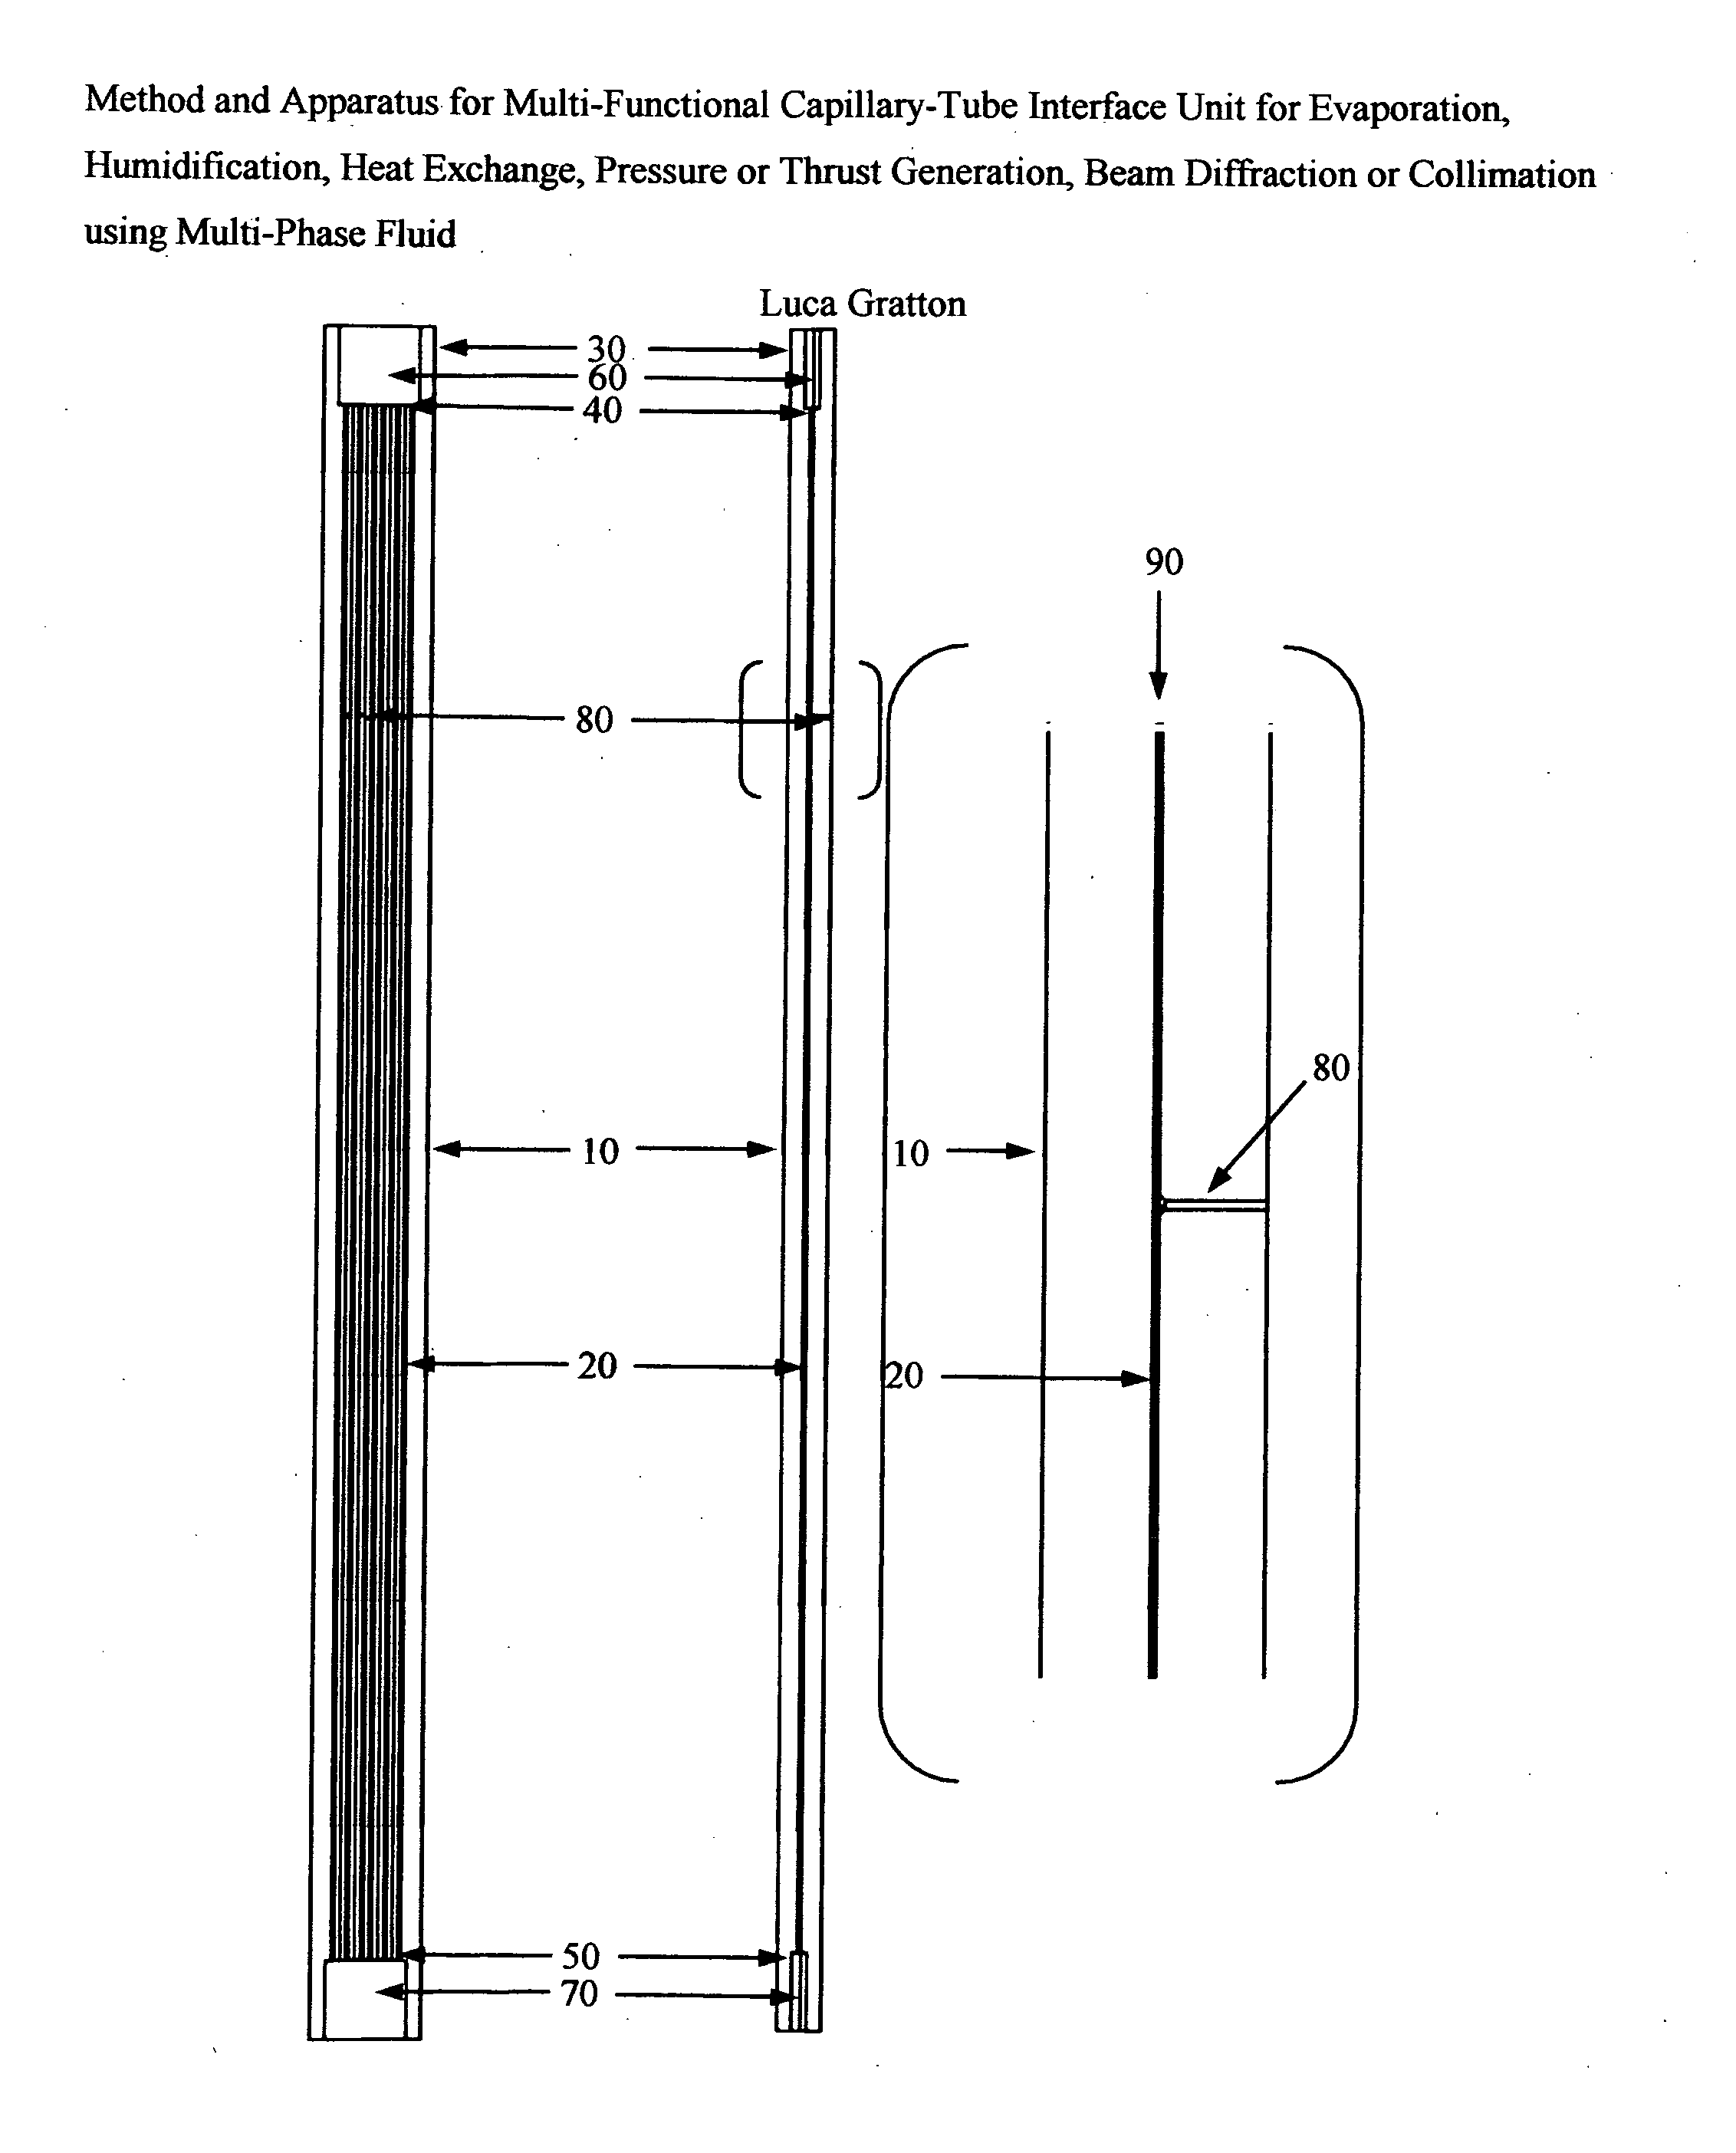 Method and apparatus for multi-functional capillary-tube interface unit for evaporation, humidification, heat exchange, pressure or thrust generation, beam diffraction or collimation using multi-phase fluid